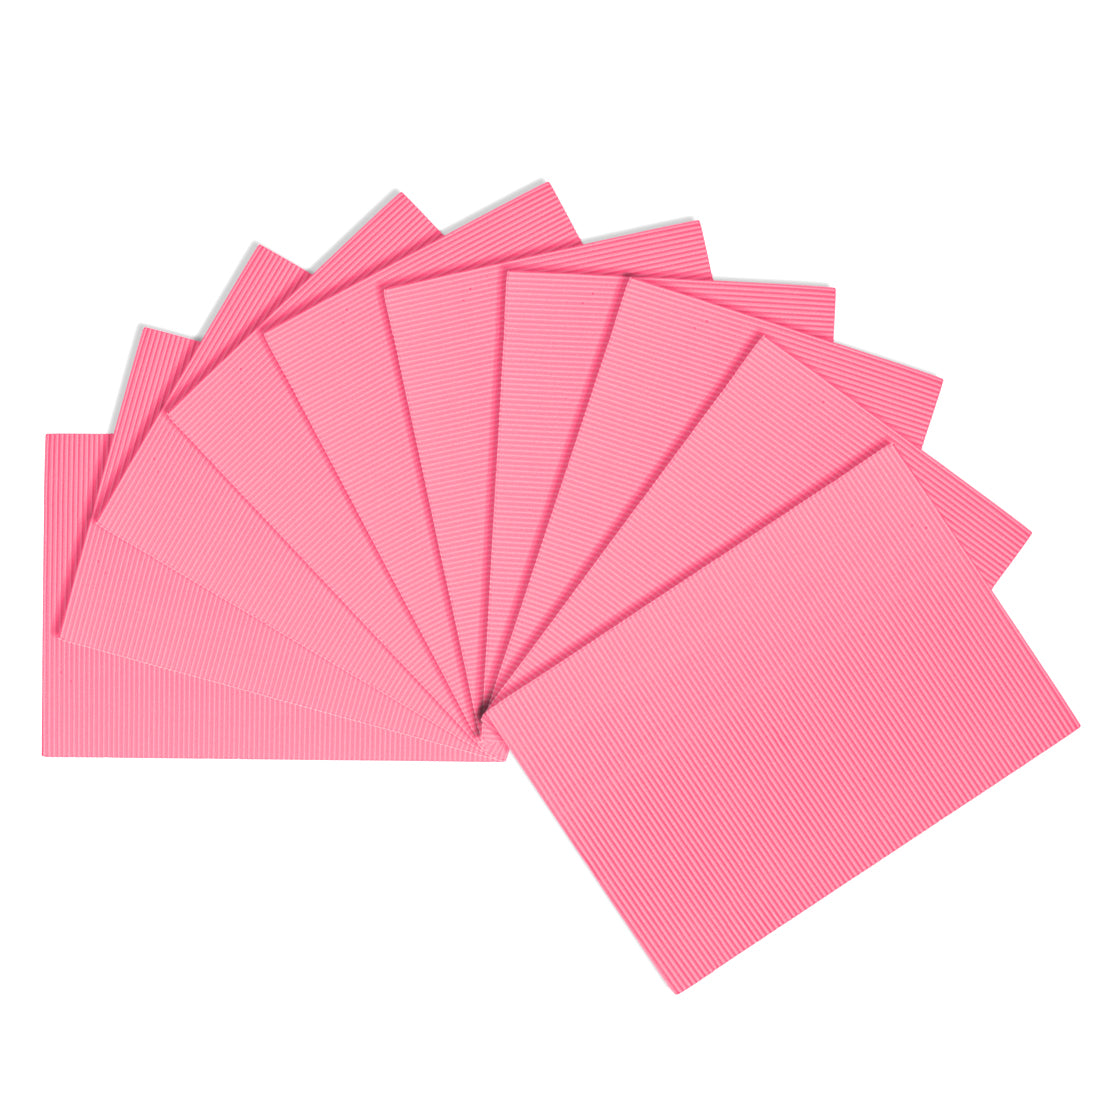 uxcell Uxcell 10pcs Corrugated Cardboard Paper Sheets,Pink,7.87-inch  x 11.81-inch